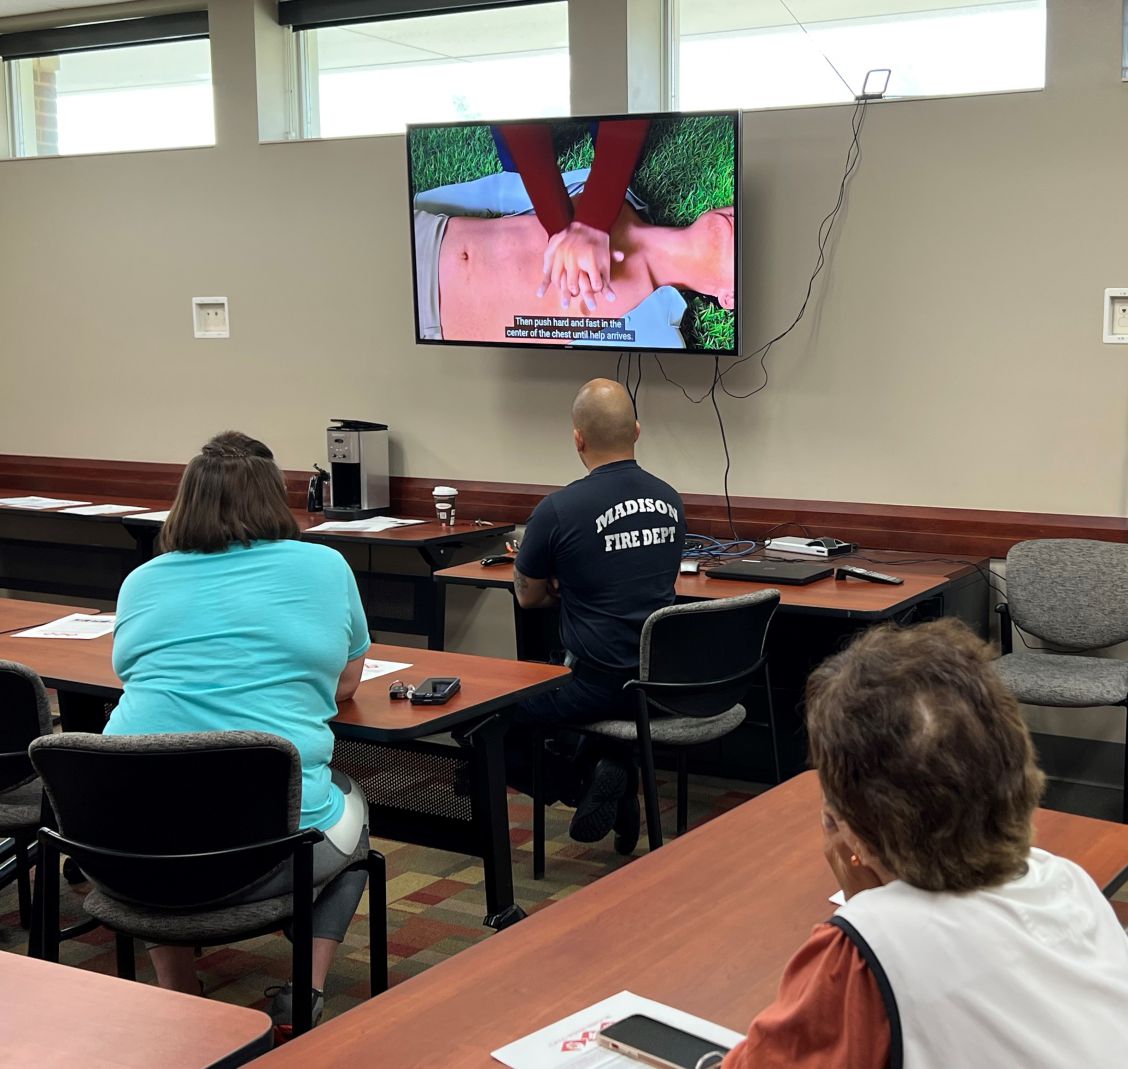 Attendees watch a CPR demo video together